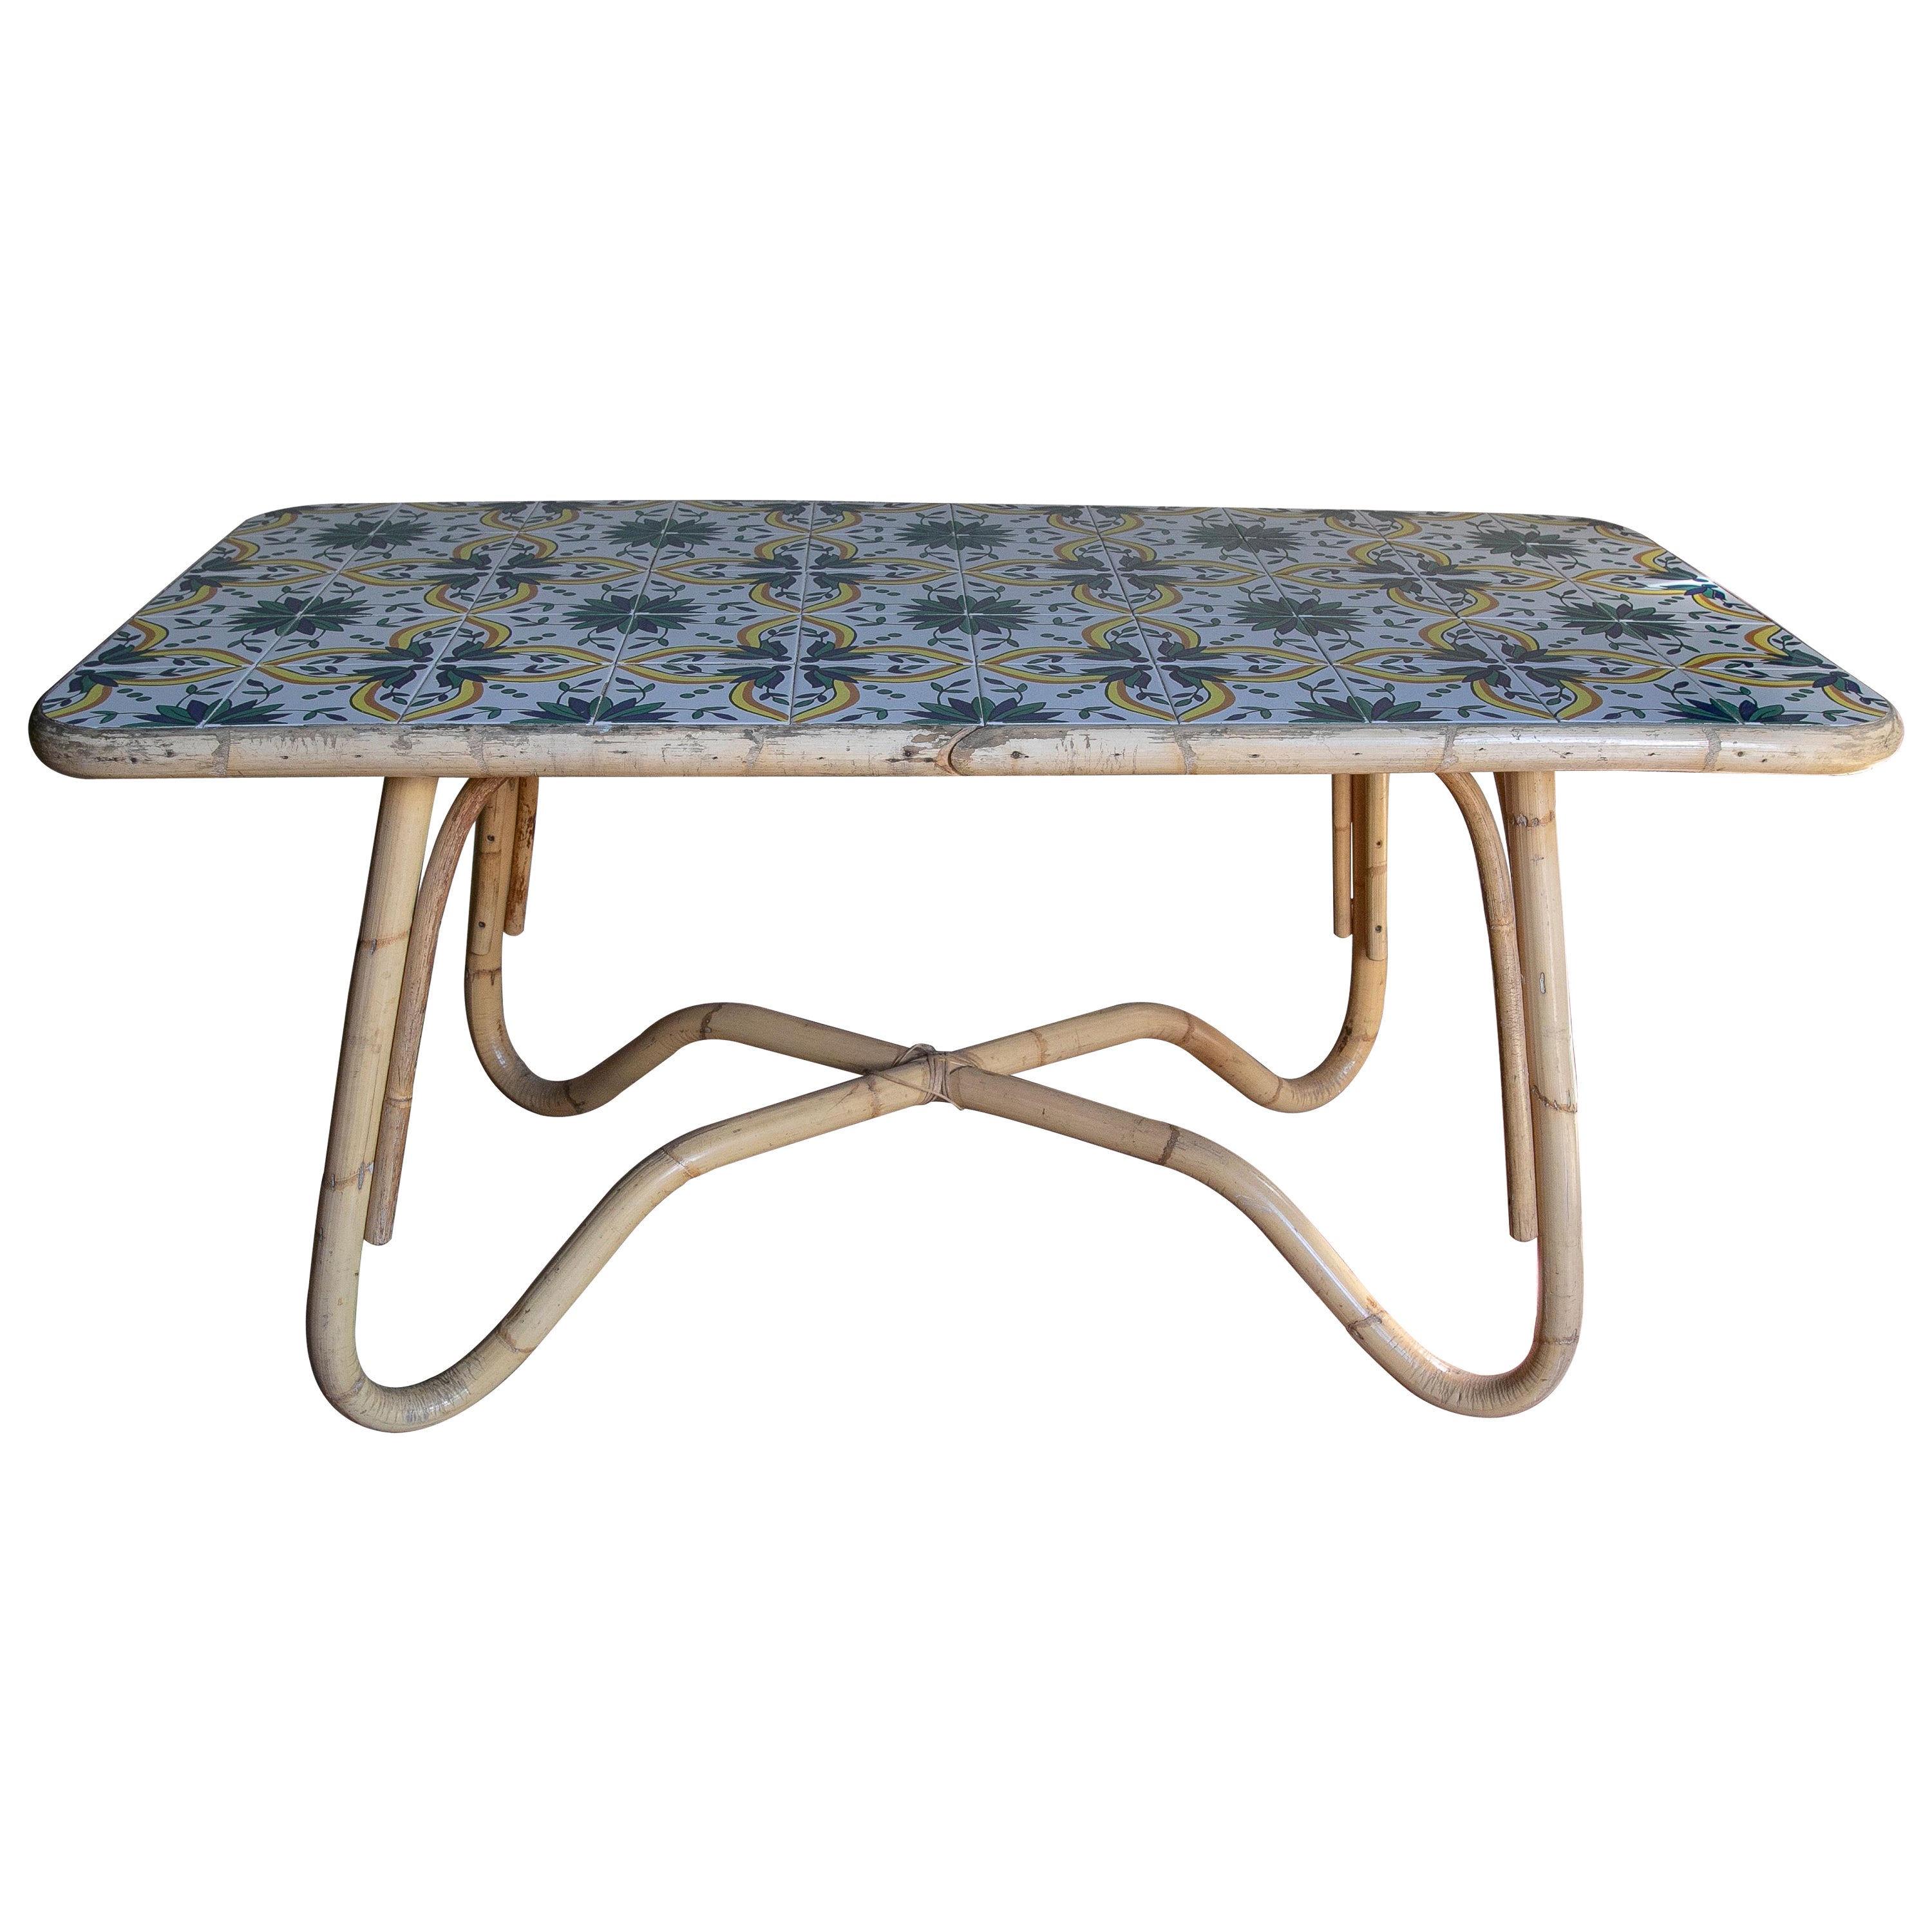 1970s Bamboo Table with Tiled Ceramic Cover 